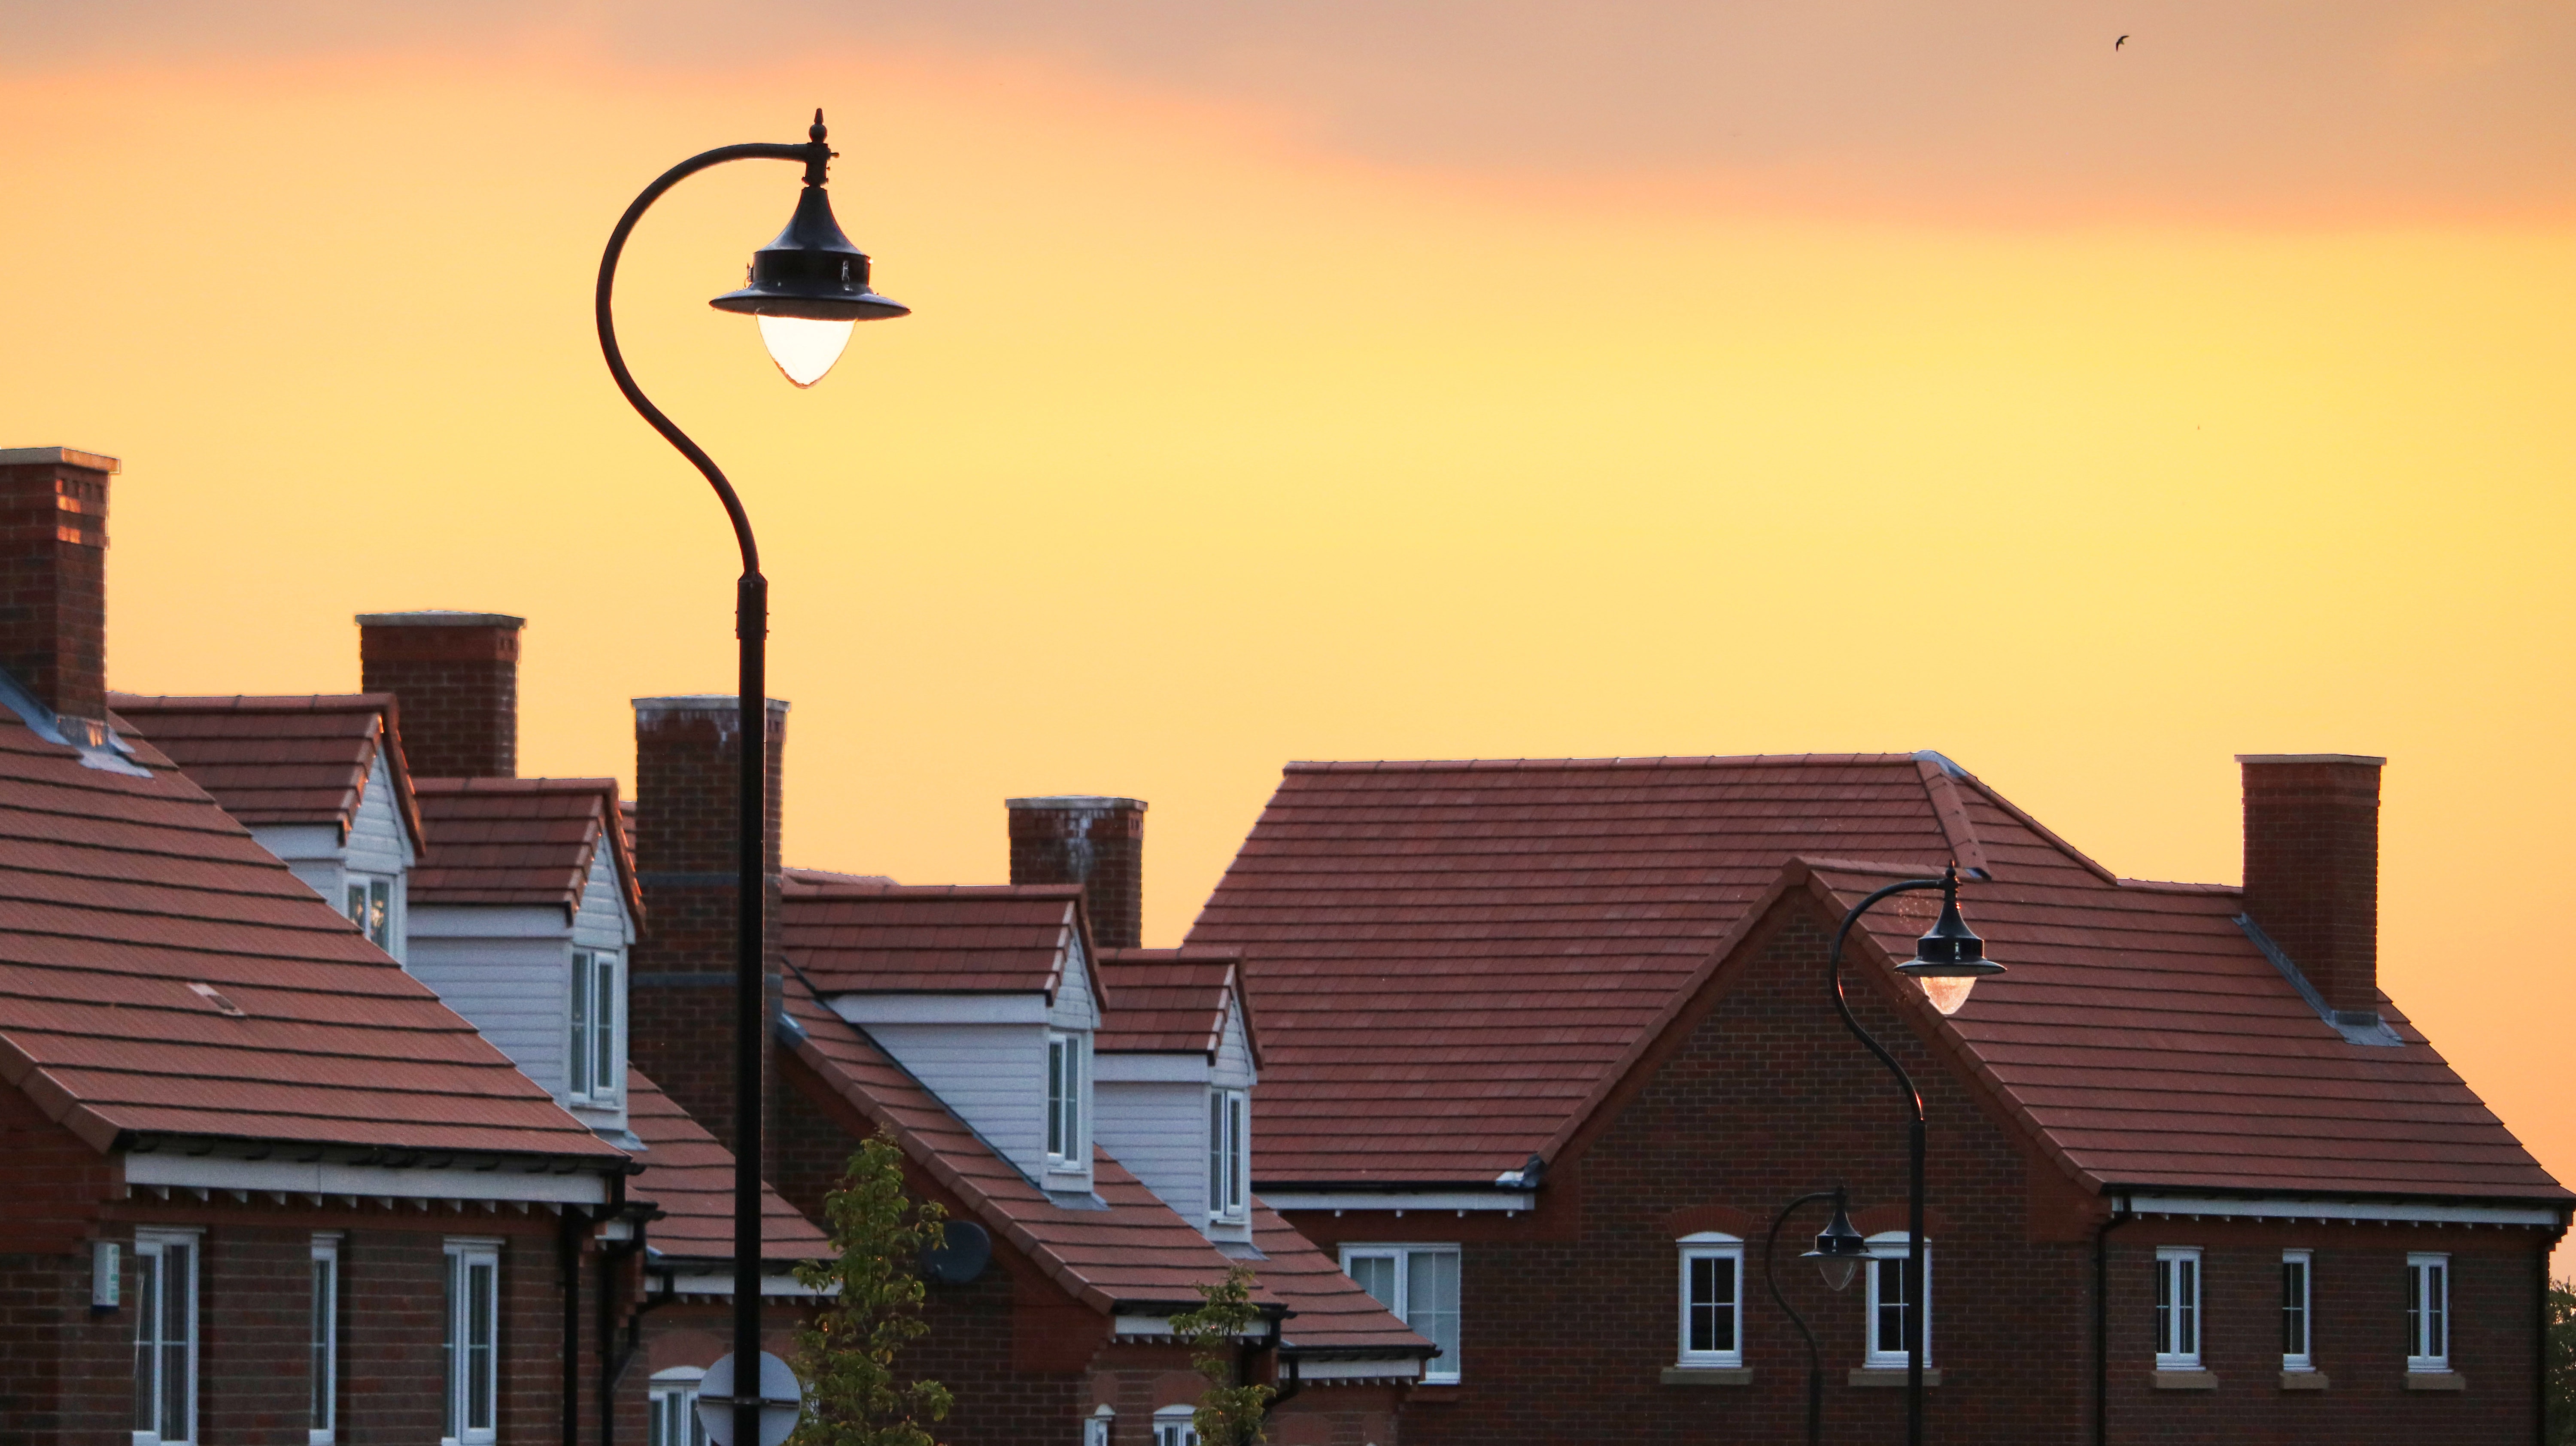 black steel street light front of maroon houses during sunset time